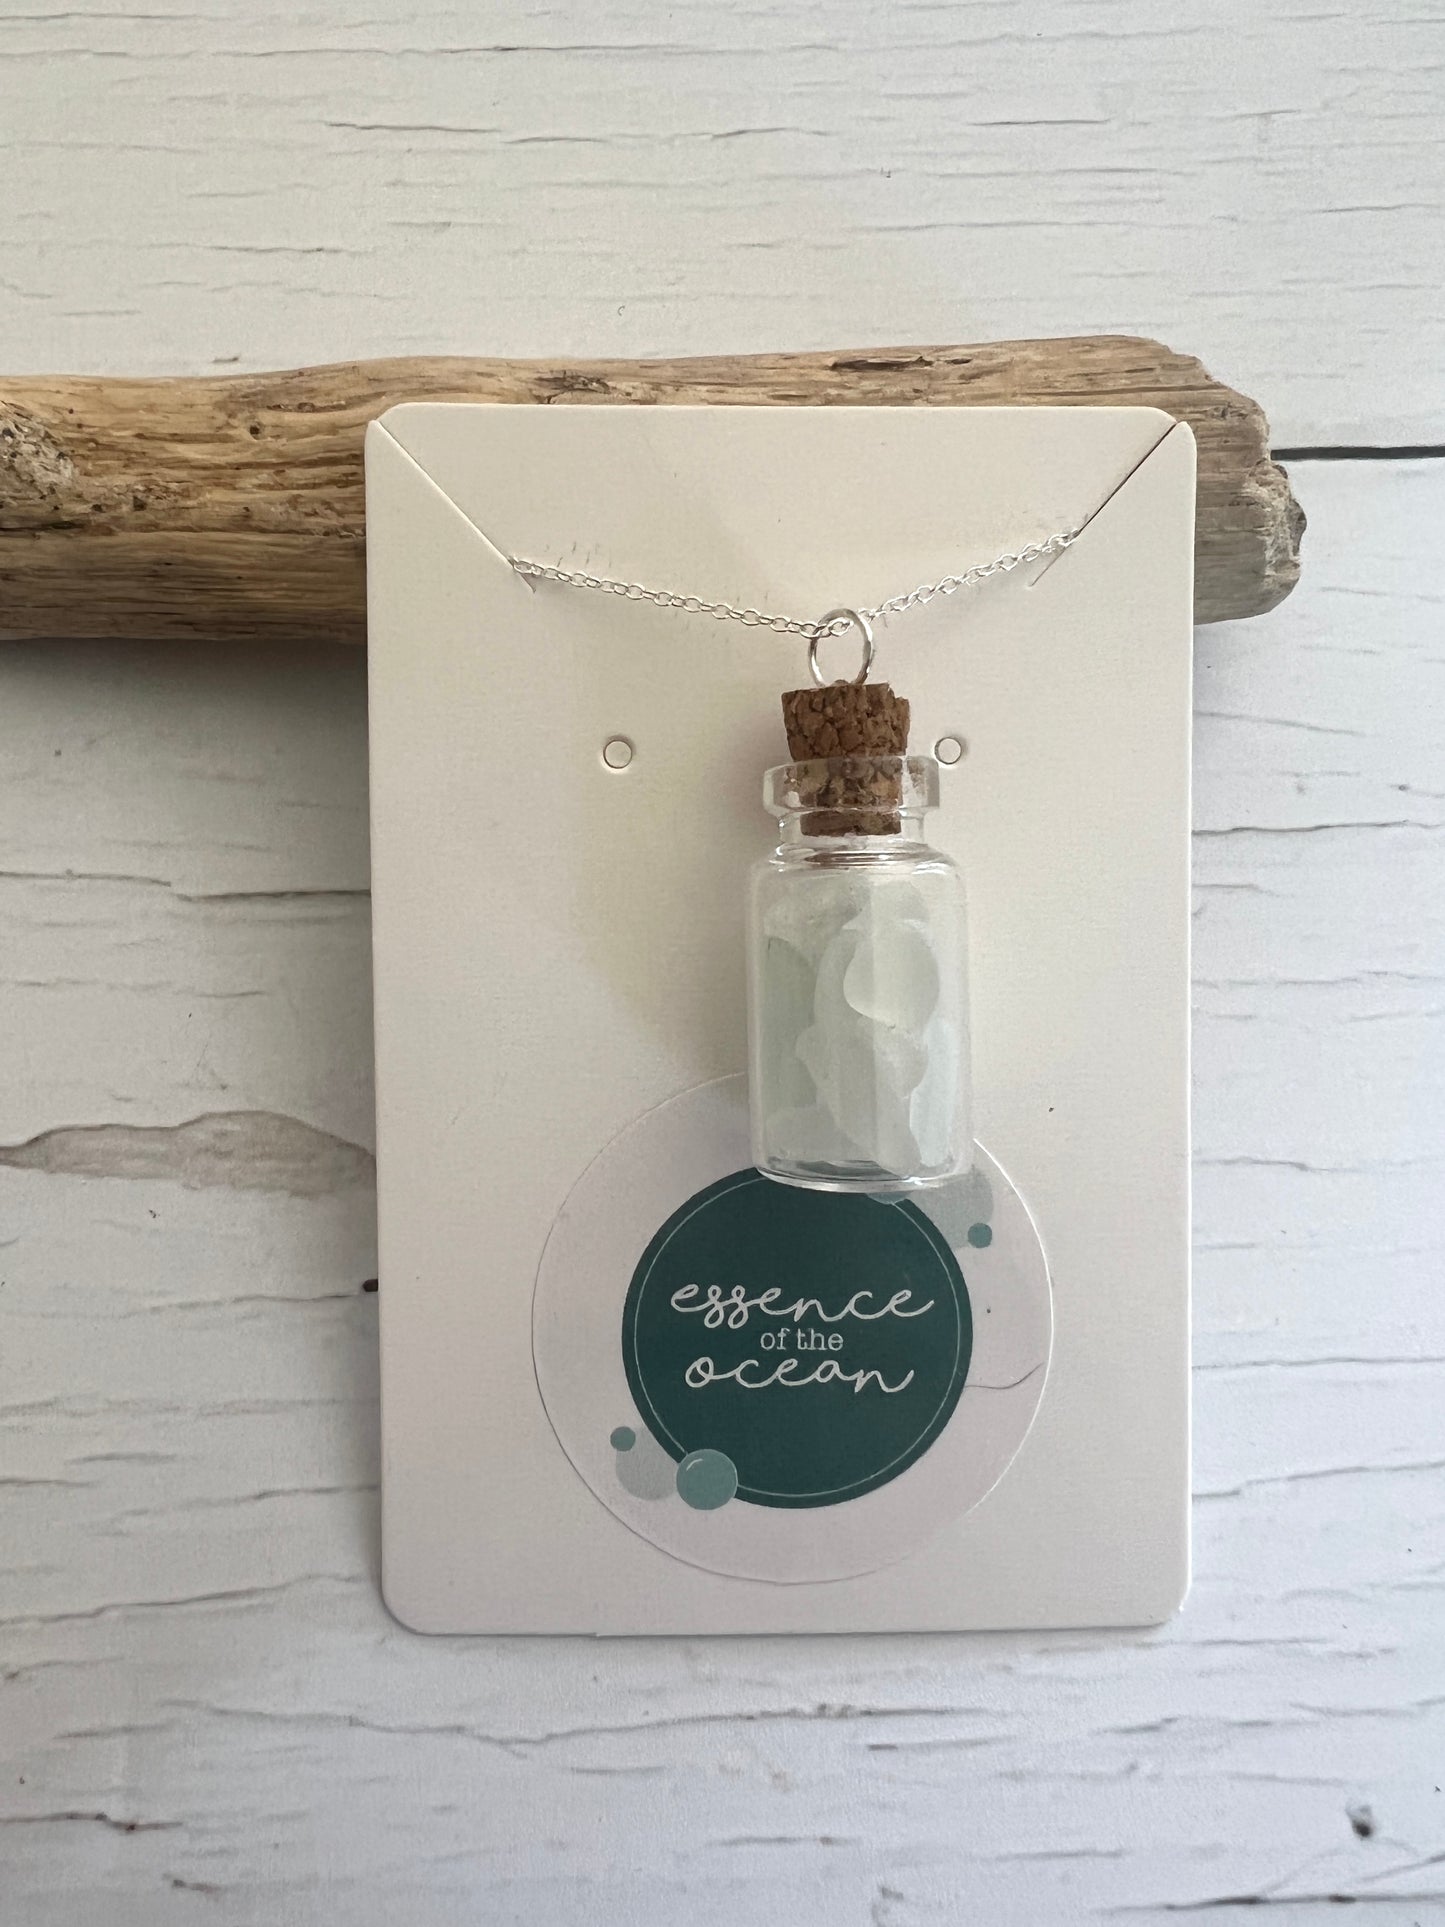 Cornish seaglass in a bottle necklace, clear